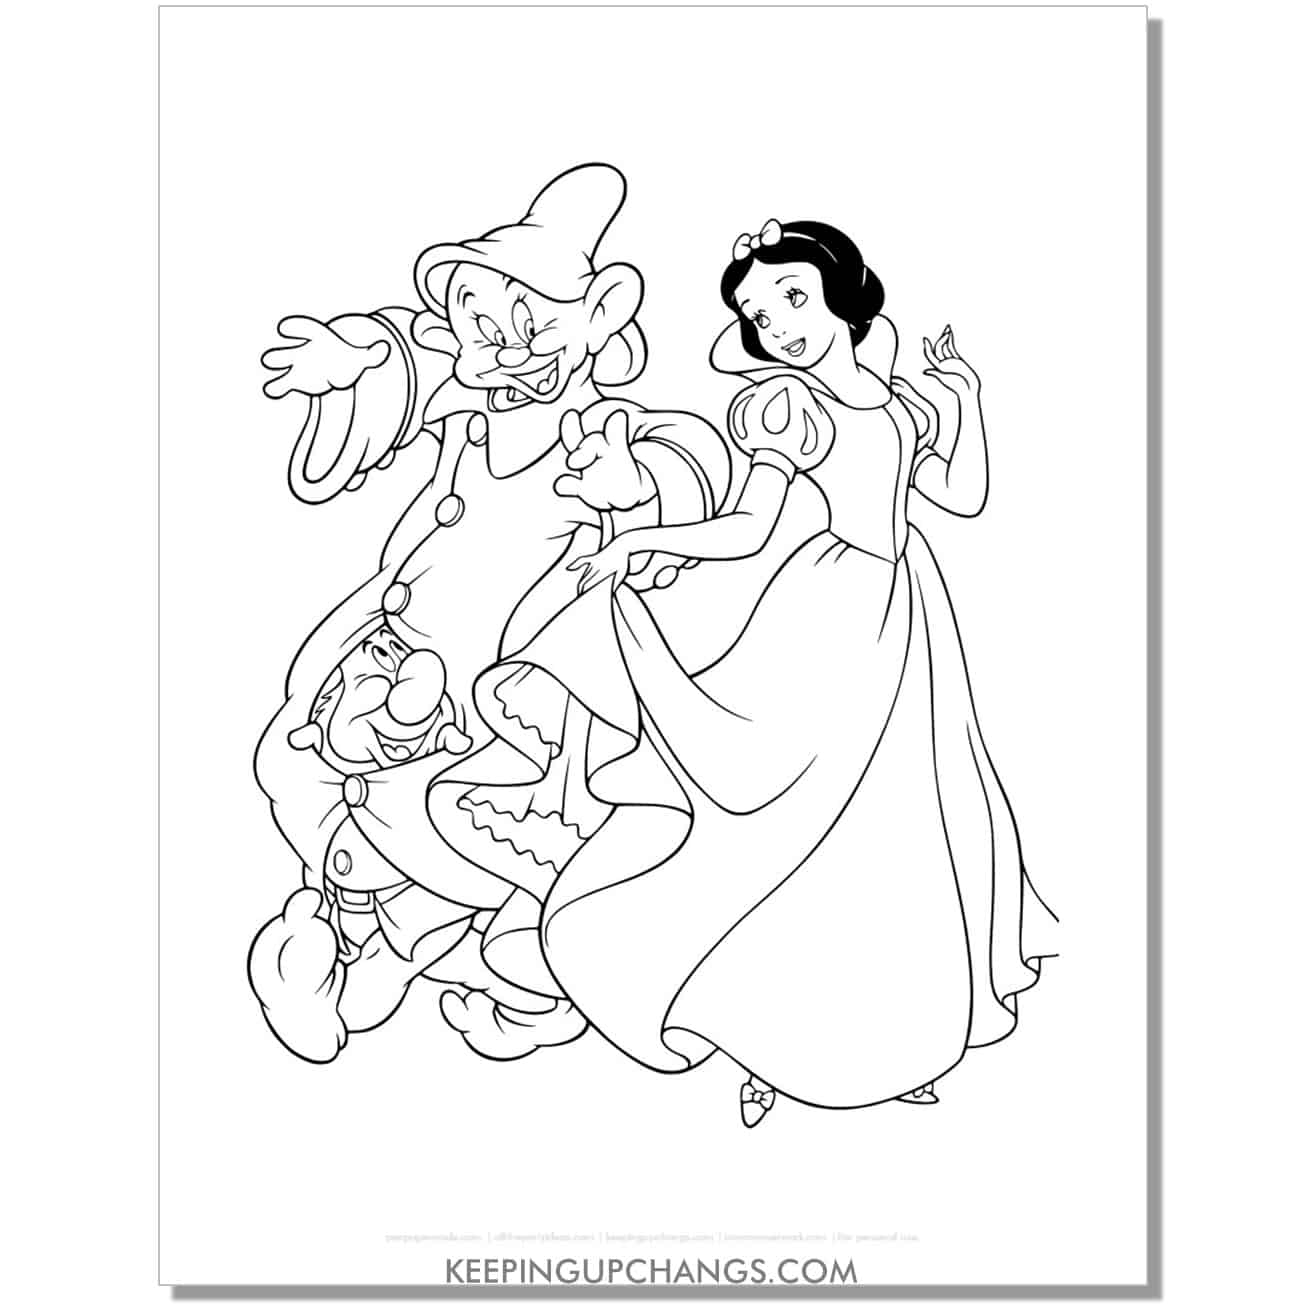 snow white dancing with dopey, sneezy coloring page, sheet.